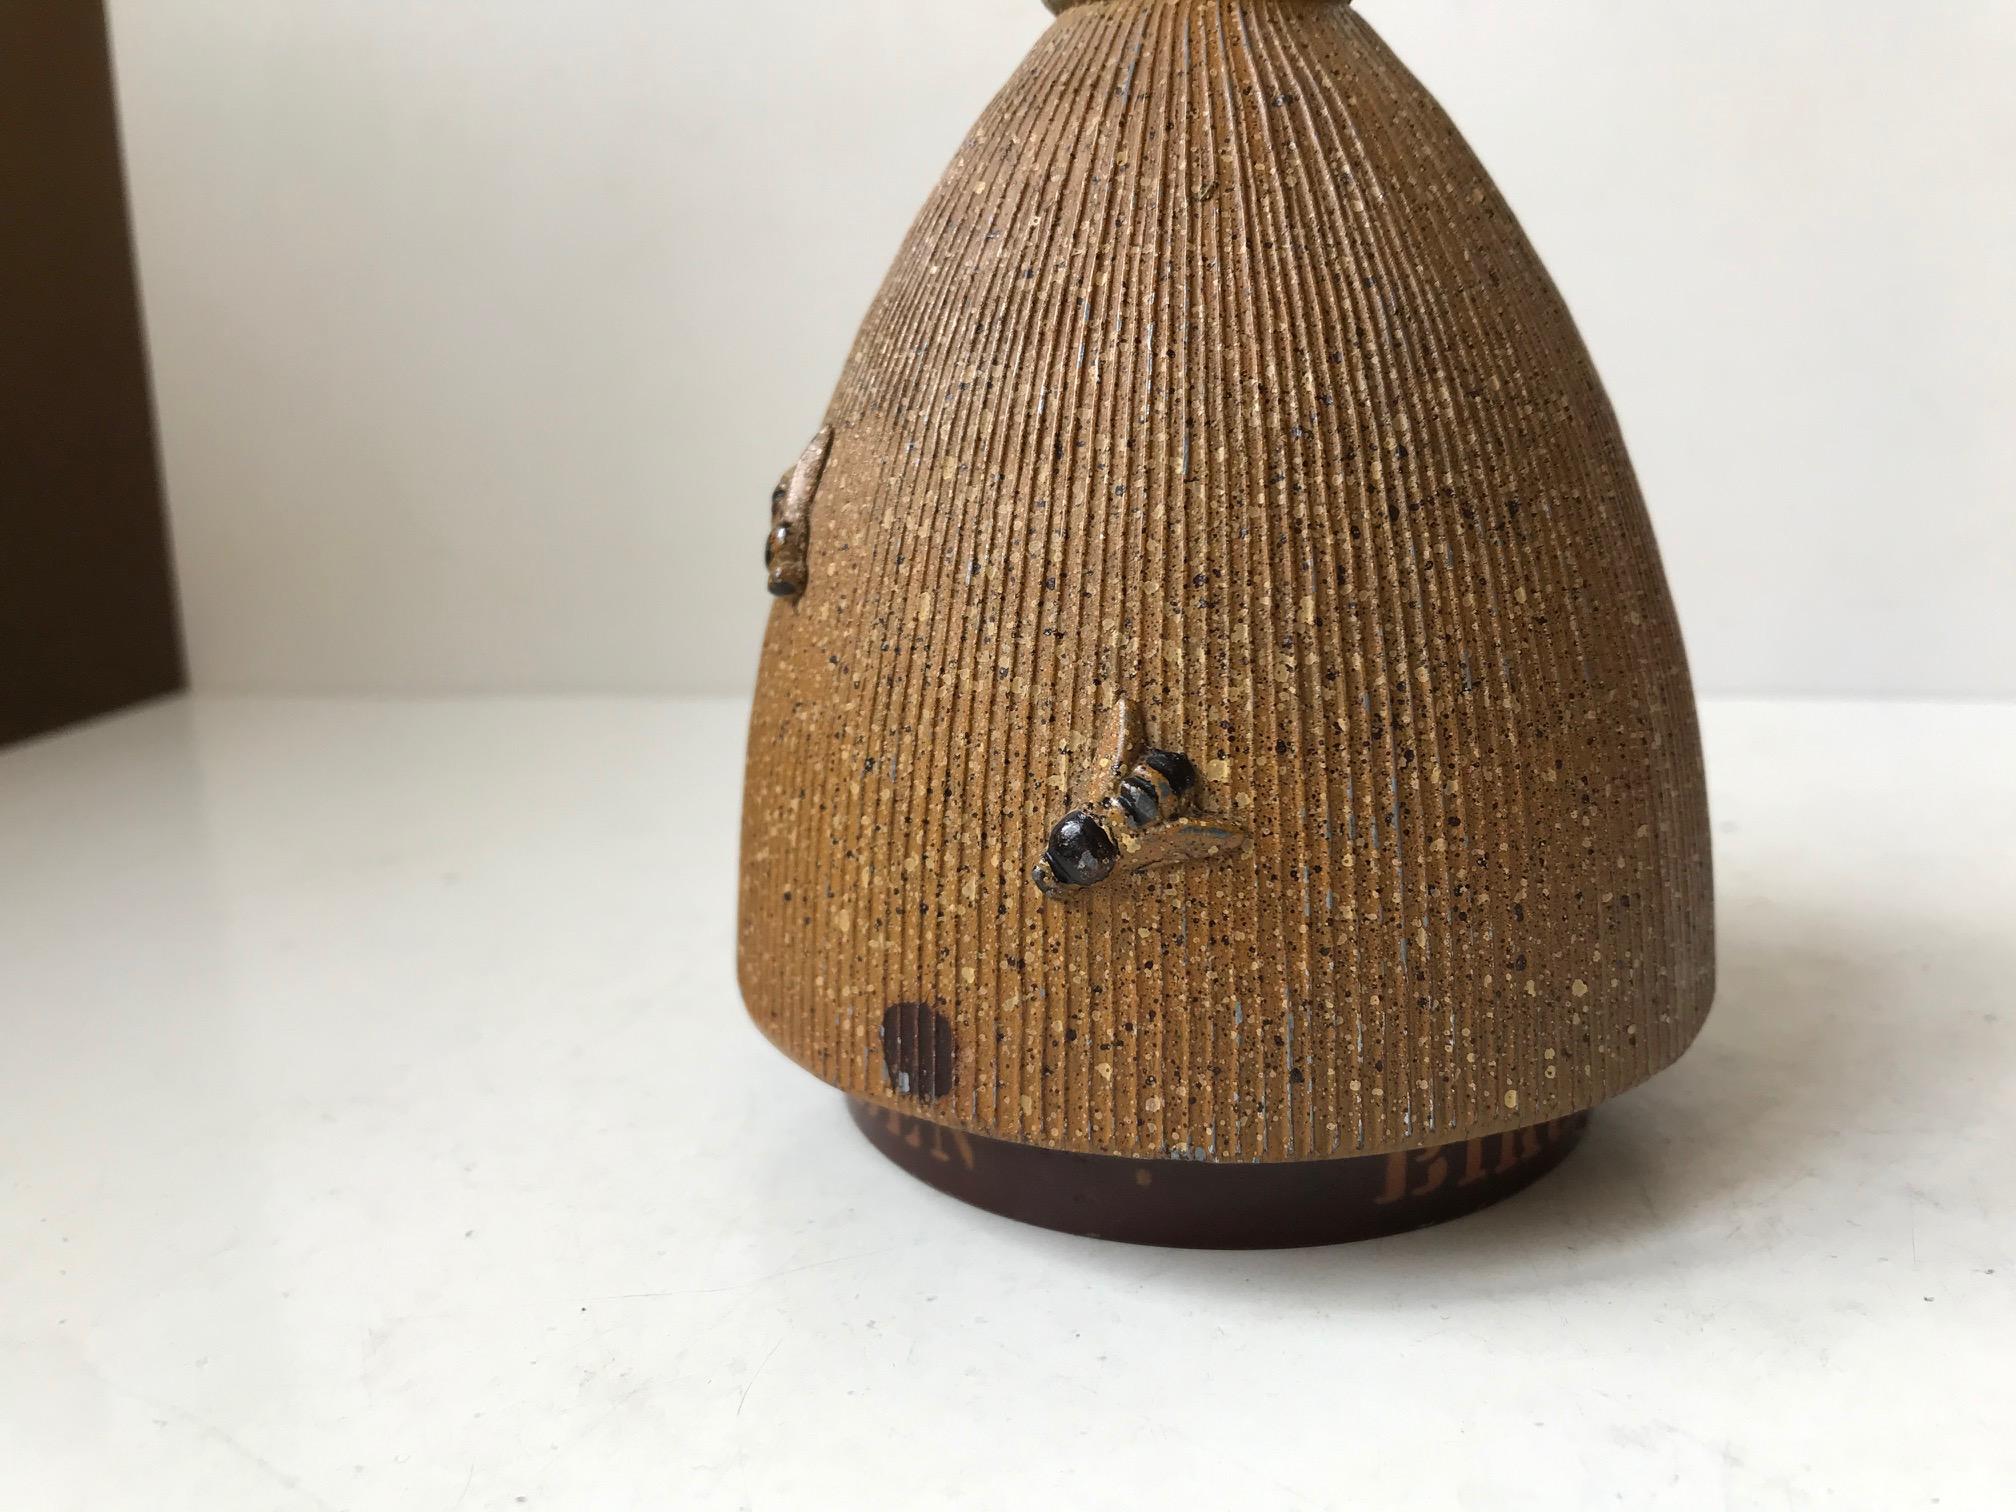 Well made money bank in painted iron. It features an insert for both coins and notes. It decorated with fixed bees also made from metal. It is titled Bikuben to its bottom. Bikuben means Beehive and it was actually made by a Danish Bank by that name